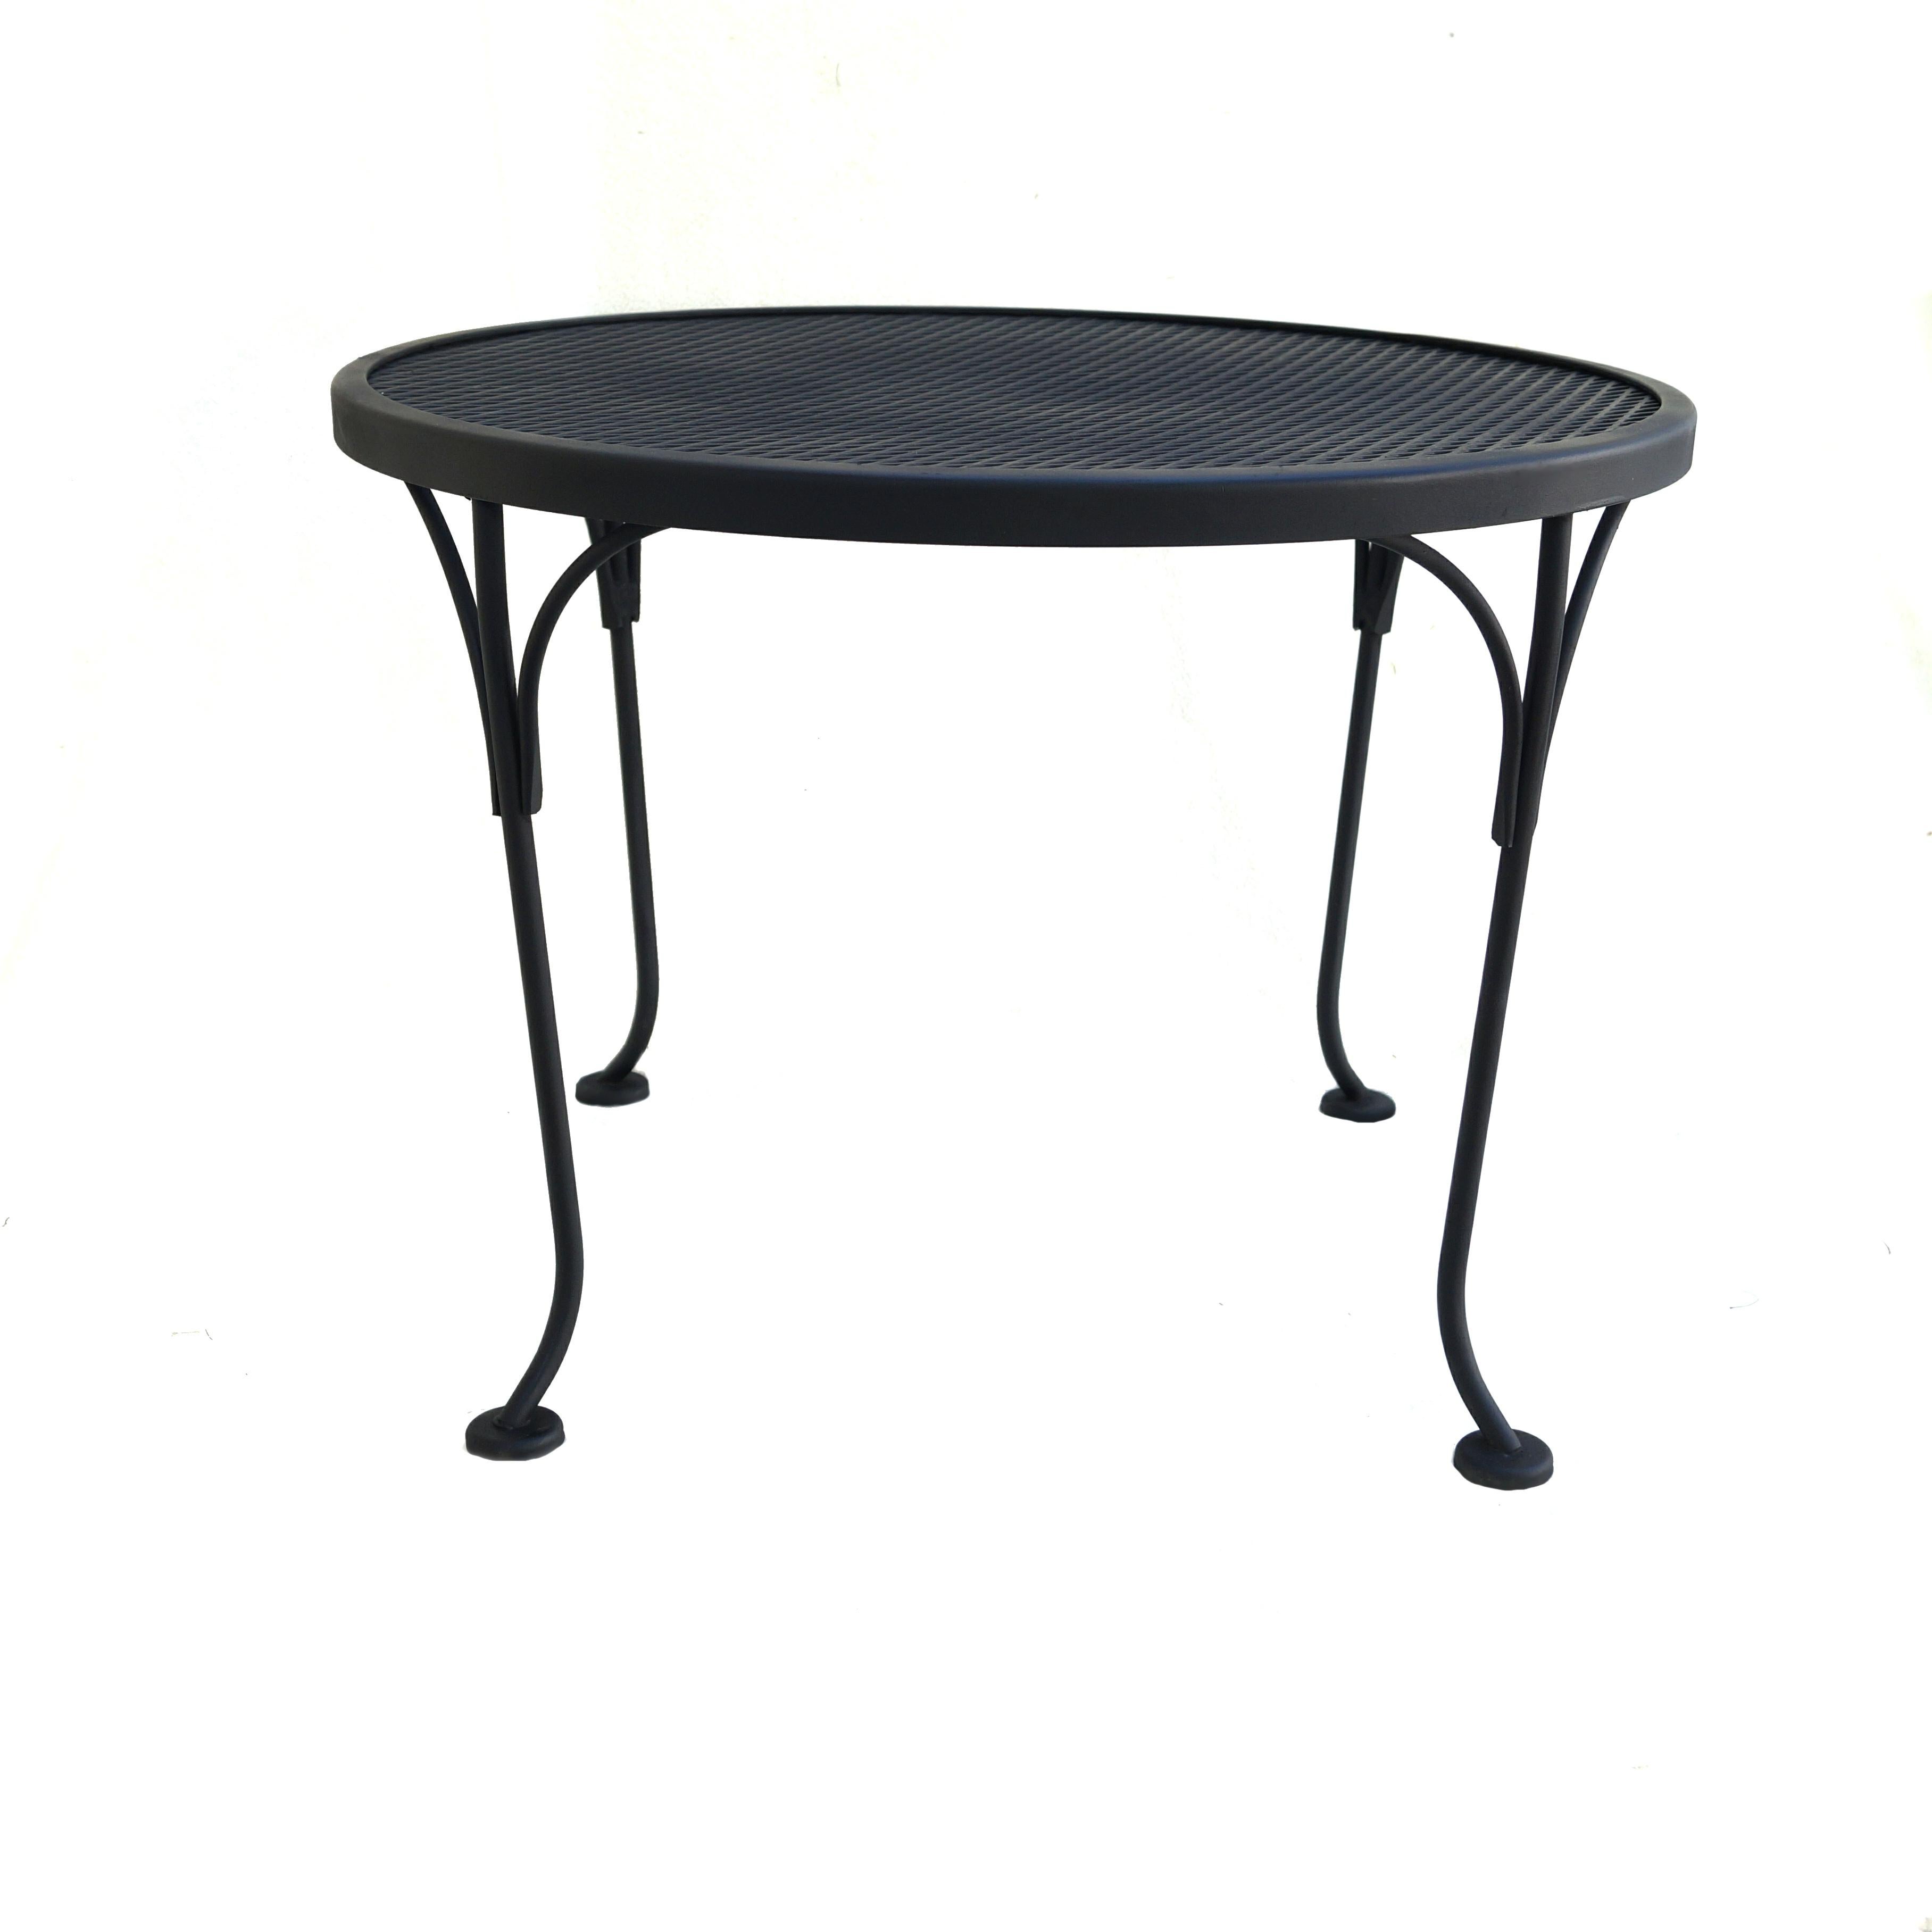 Mid-Century Modern Russell Woodard Furniture Round Black Wrought Iron Patio Coffee or Side Table For Sale